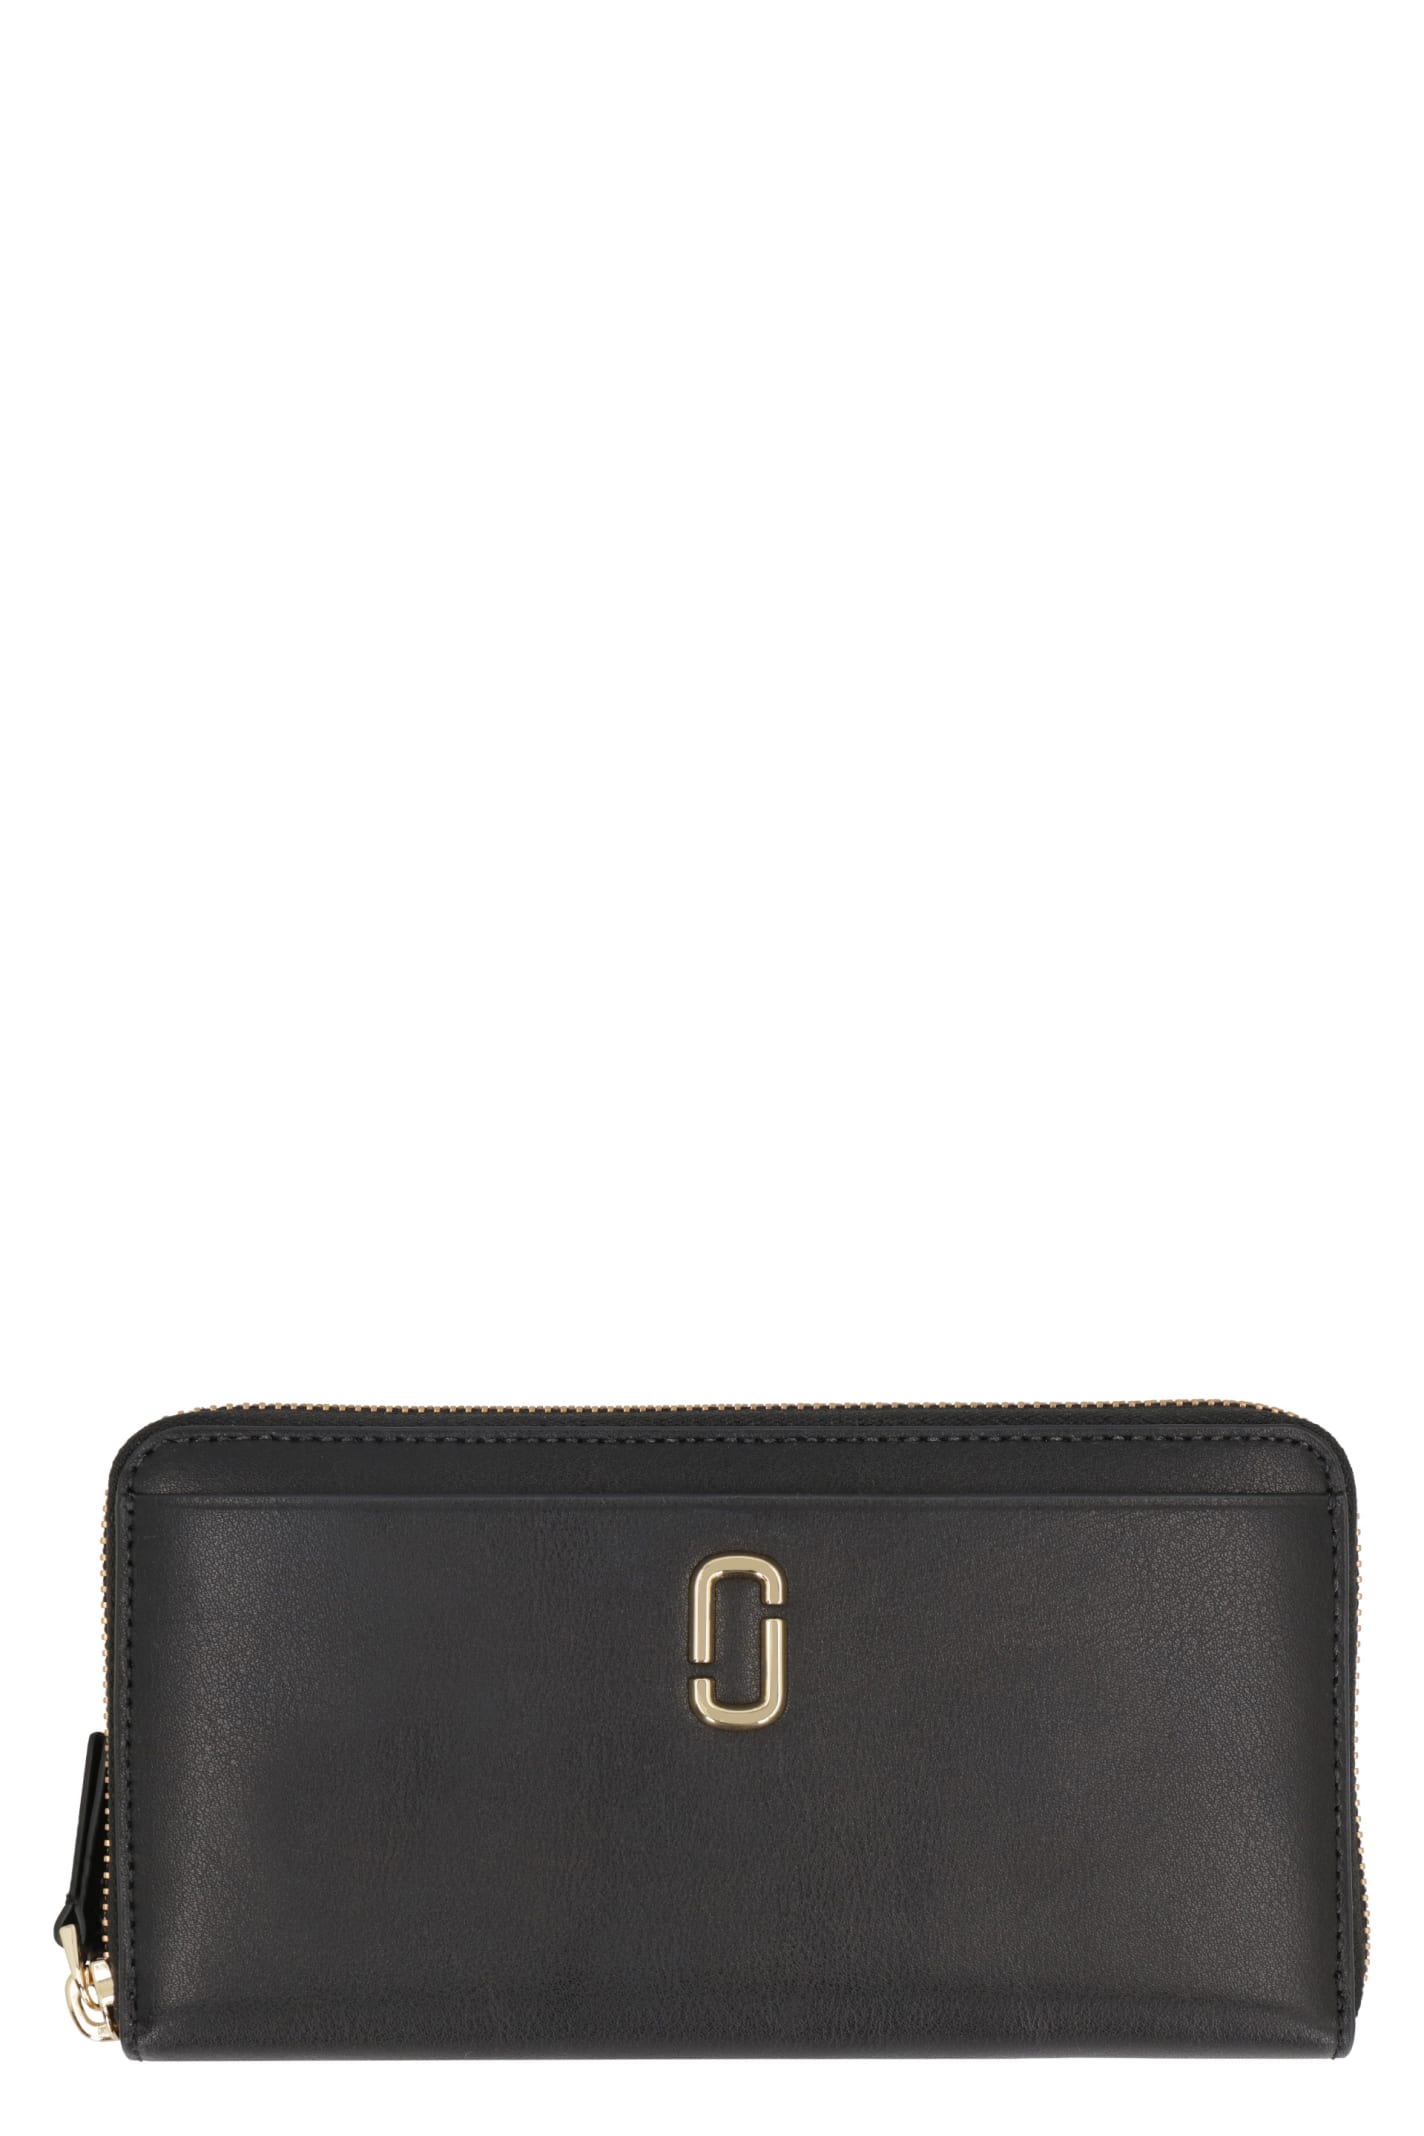 MARC JACOBS LEATHER WALLET